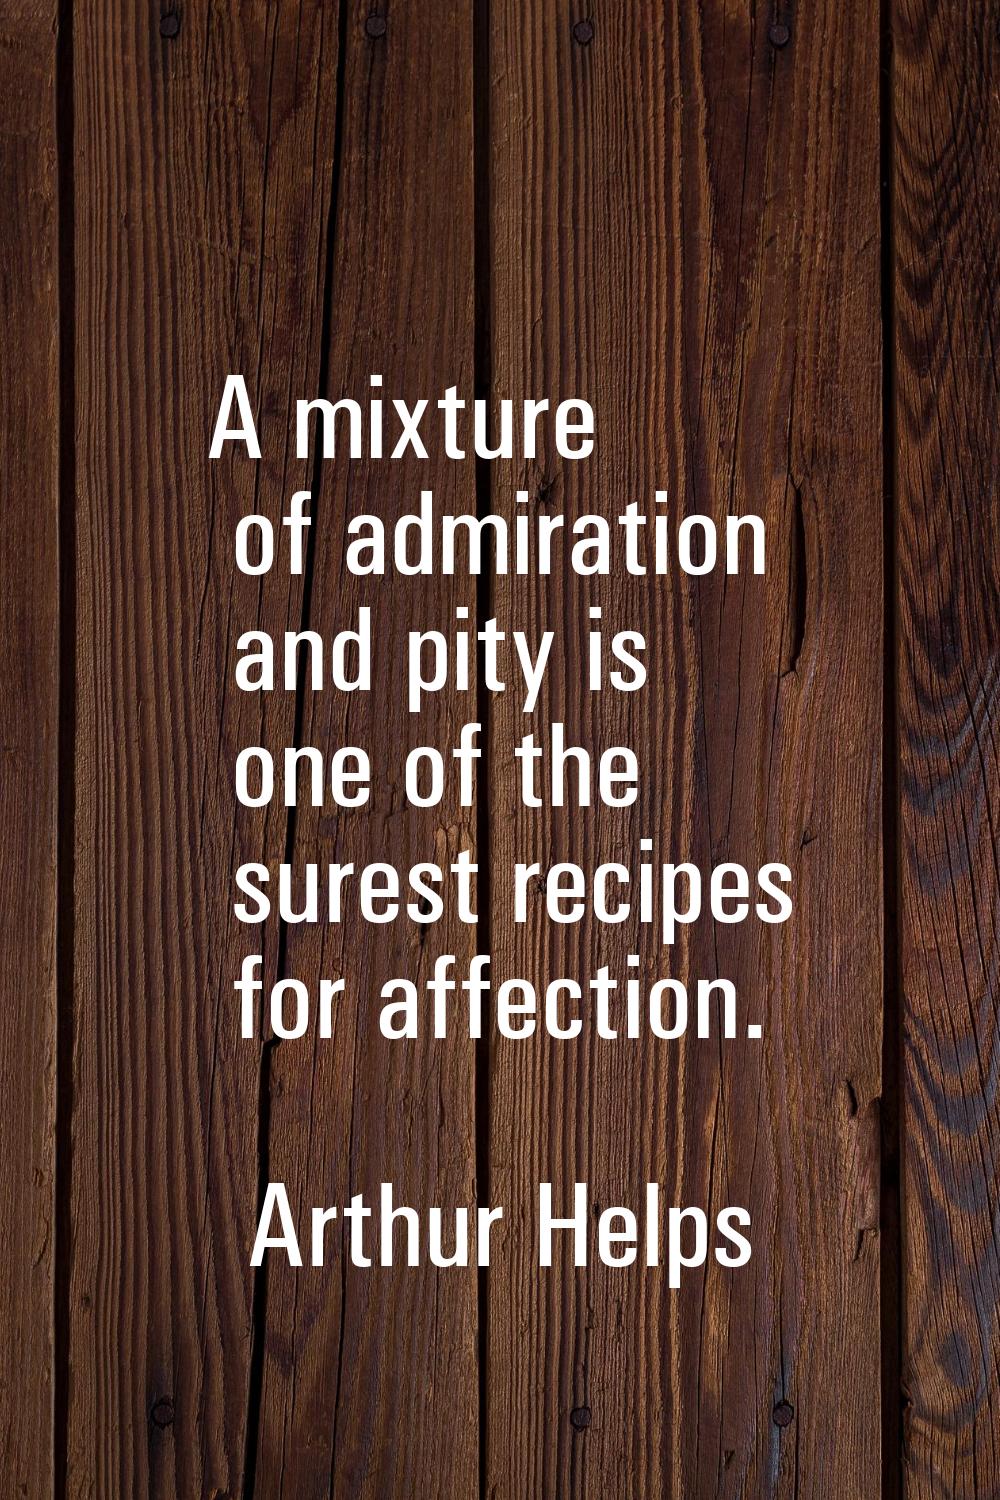 A mixture of admiration and pity is one of the surest recipes for affection.